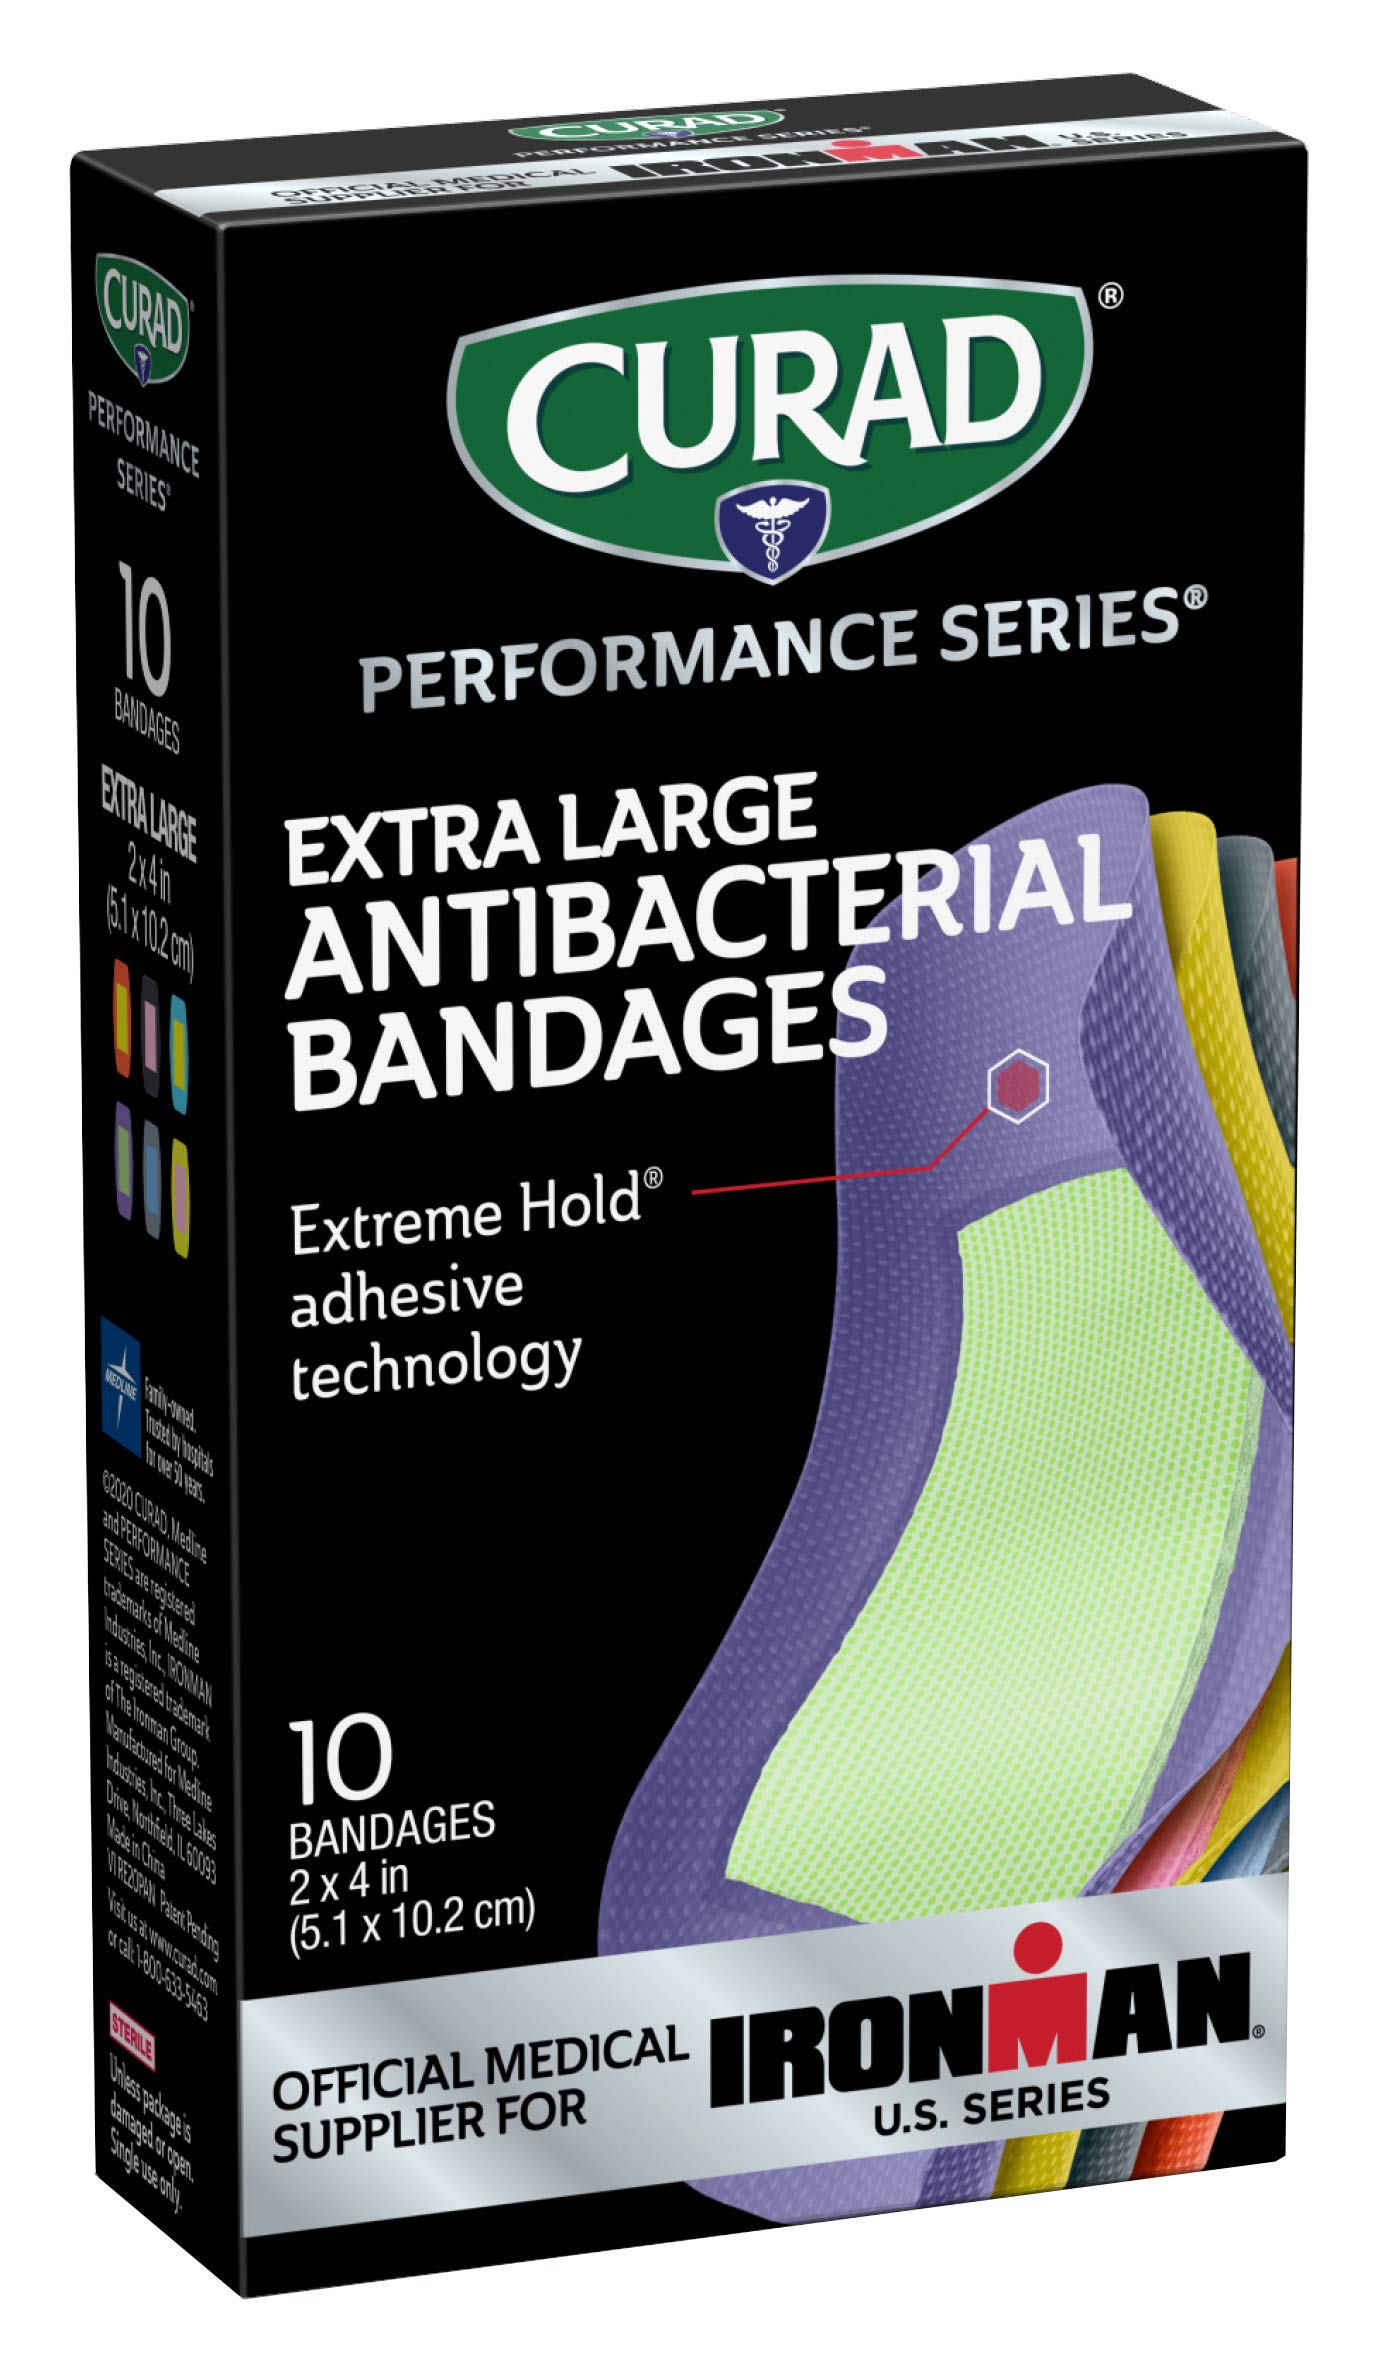 Curad Performance Series Ironman XL Antibacterial Bandages, Extreme Hold Adhesive Technology, Fabric Bandages, 10 Count